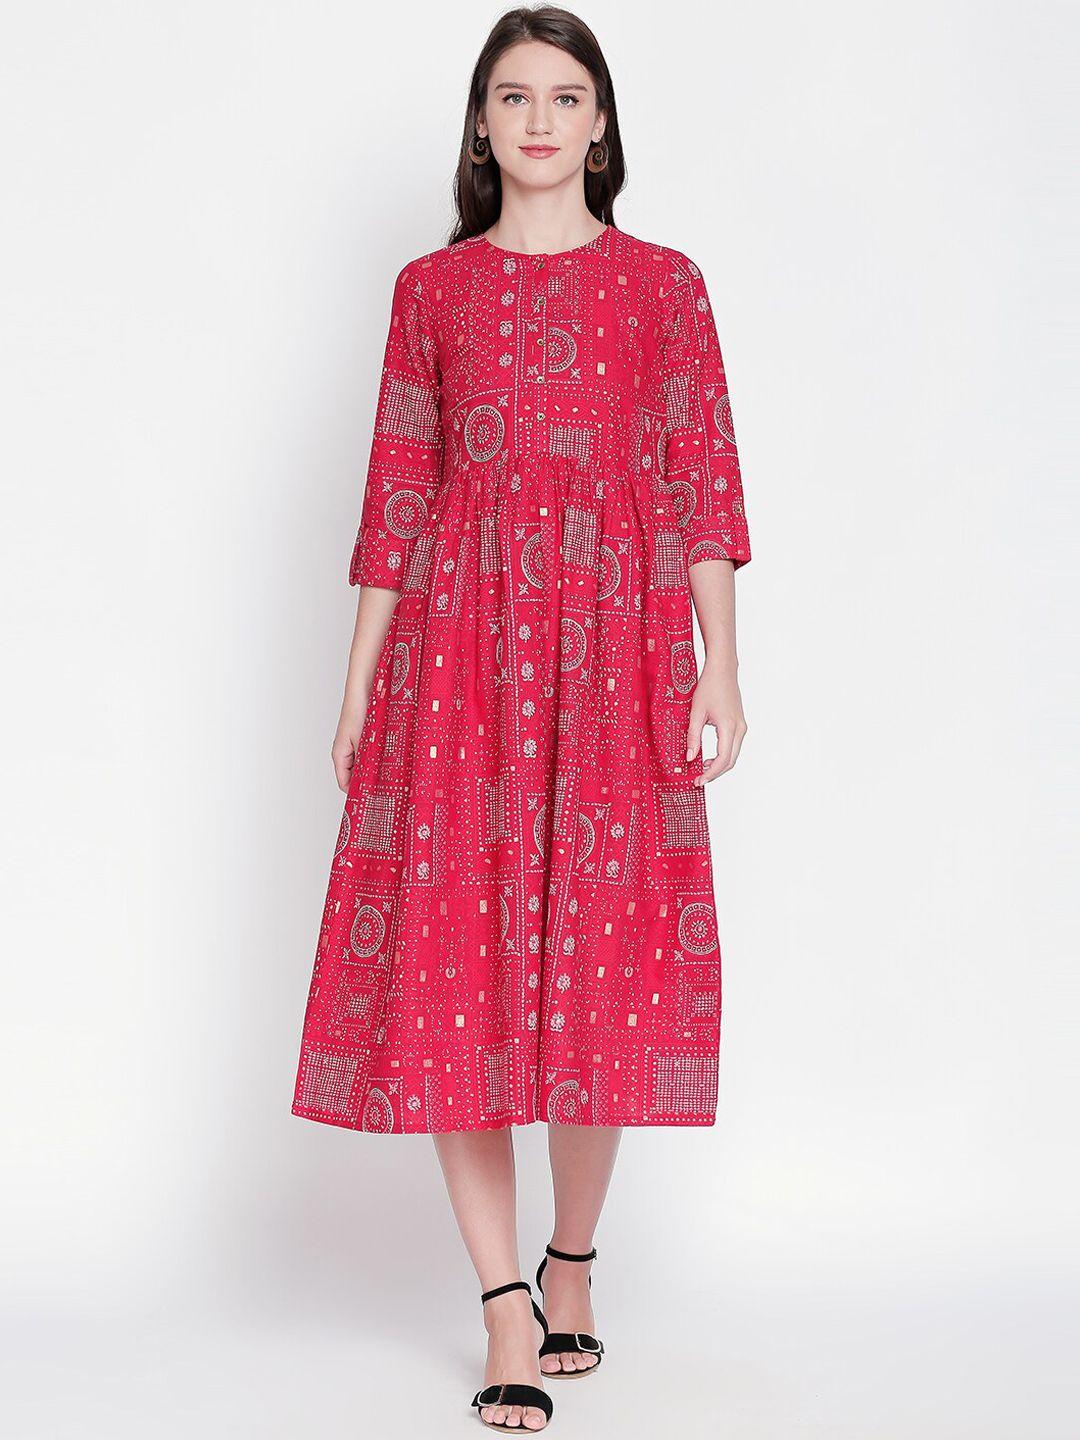 akkriti-by-pantaloons-women-red-&-off-white-printed-fit-and-flare-dress